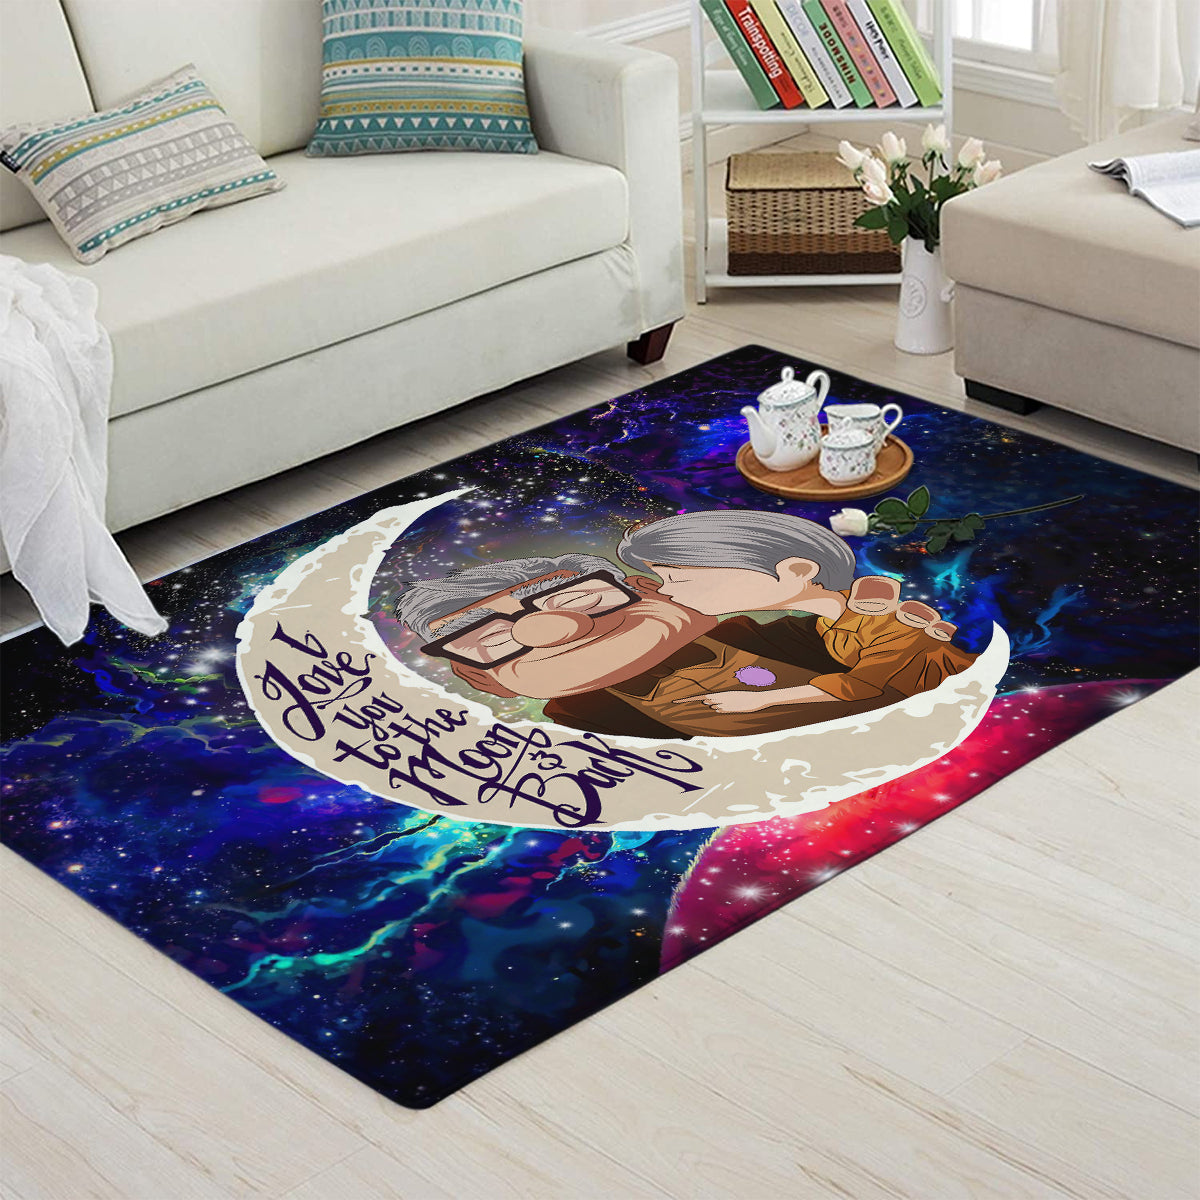 Up Couple Love You To The Moon Galaxy Carpet Rug Home Room Decor